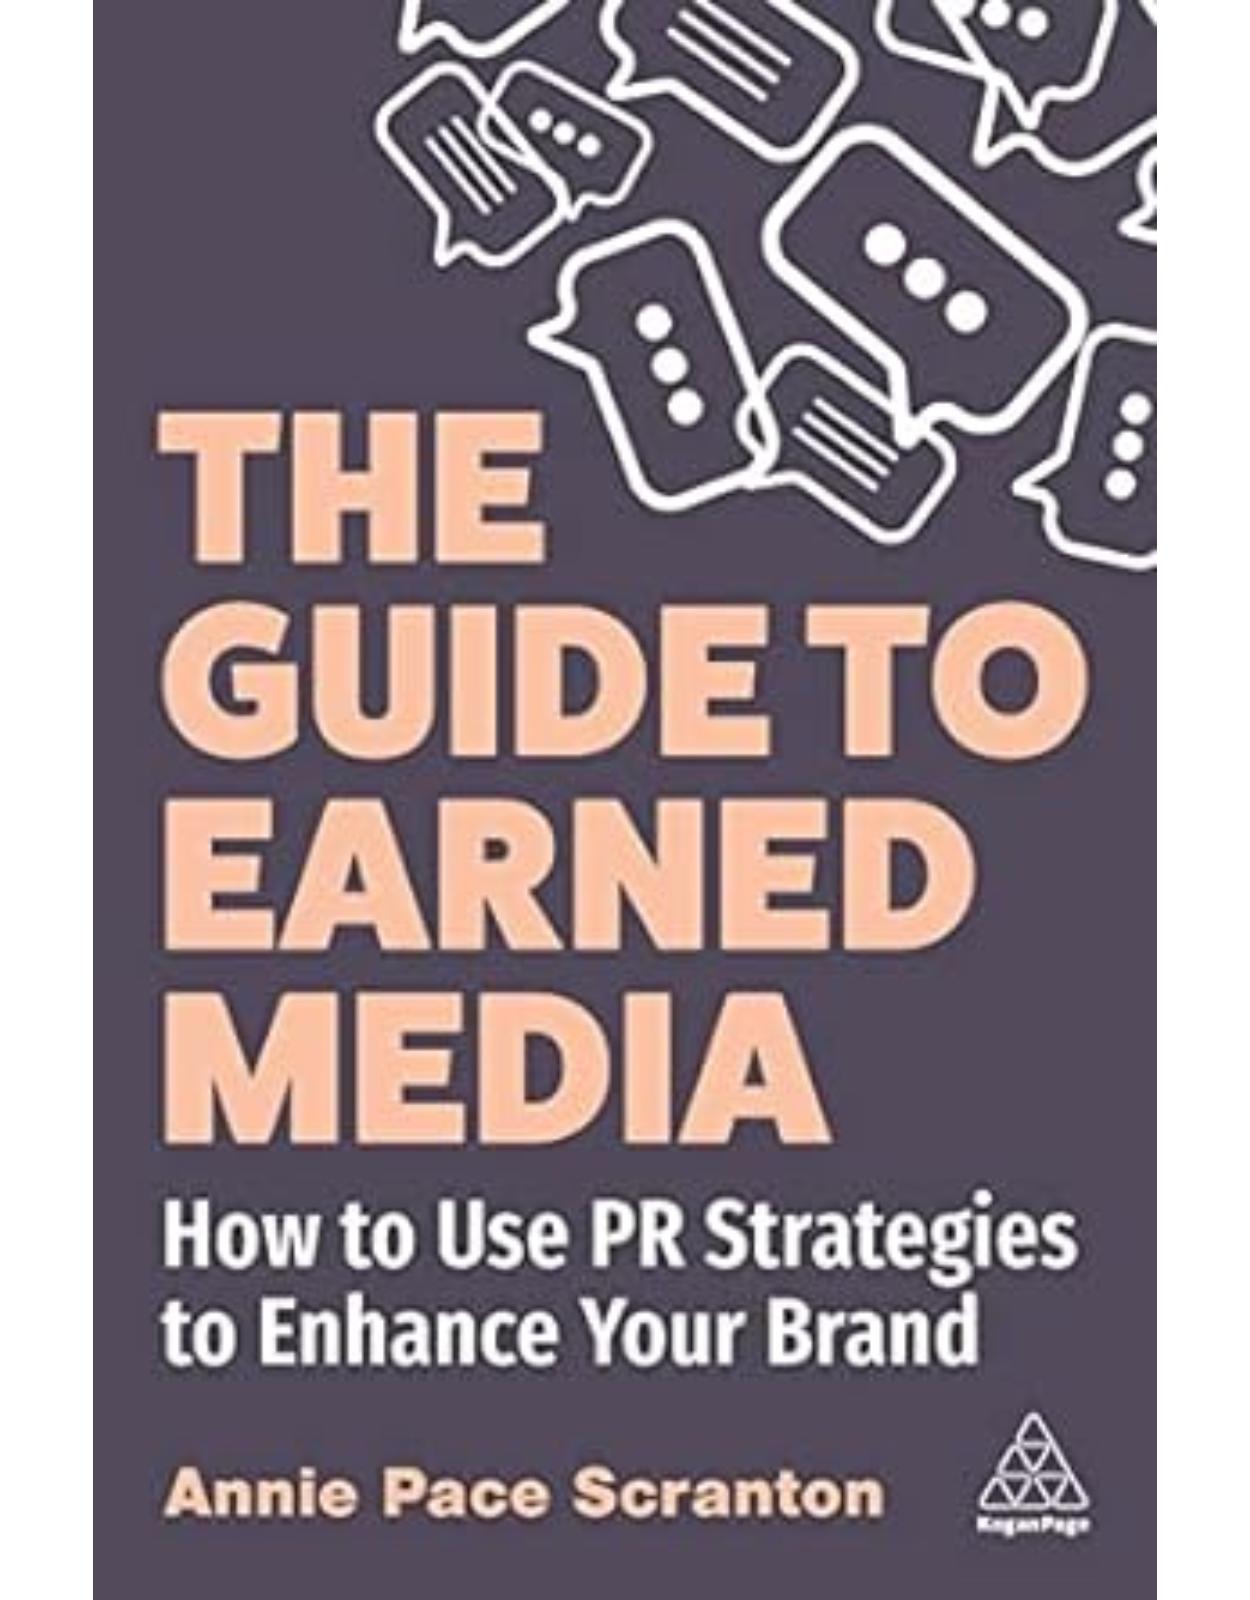 The Guide to Earned Media